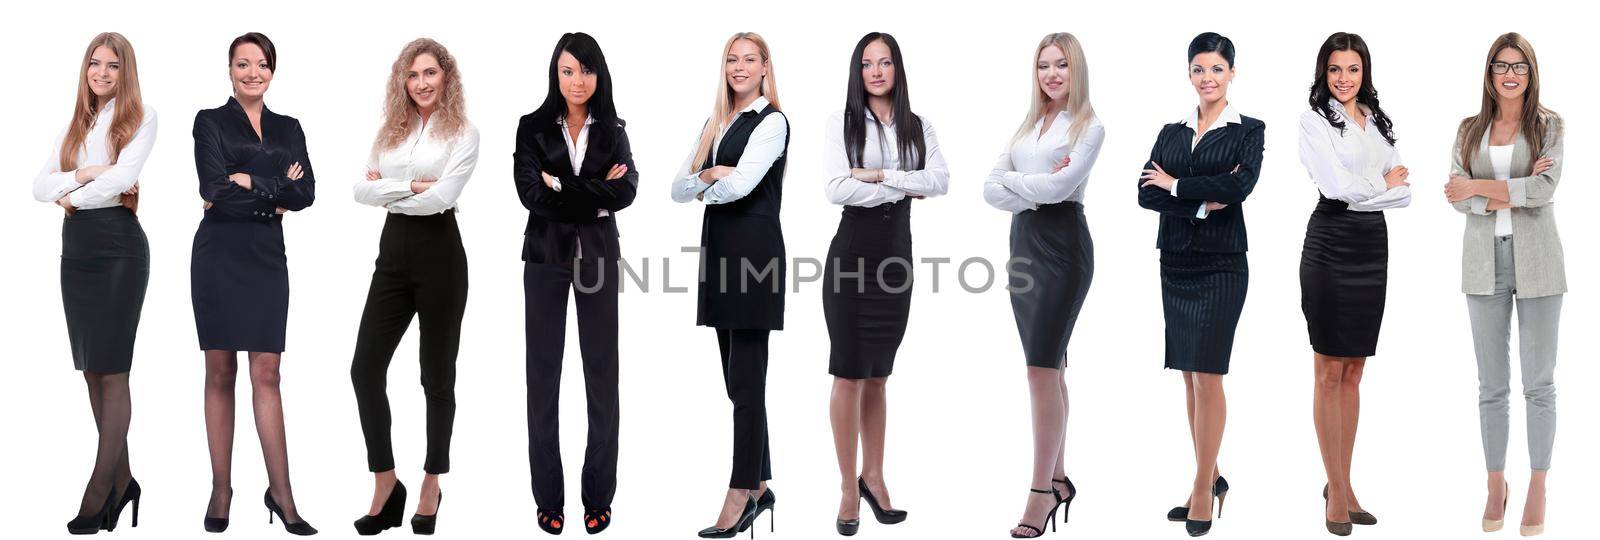 Collection of full-length portraits of young business women isolated on white background